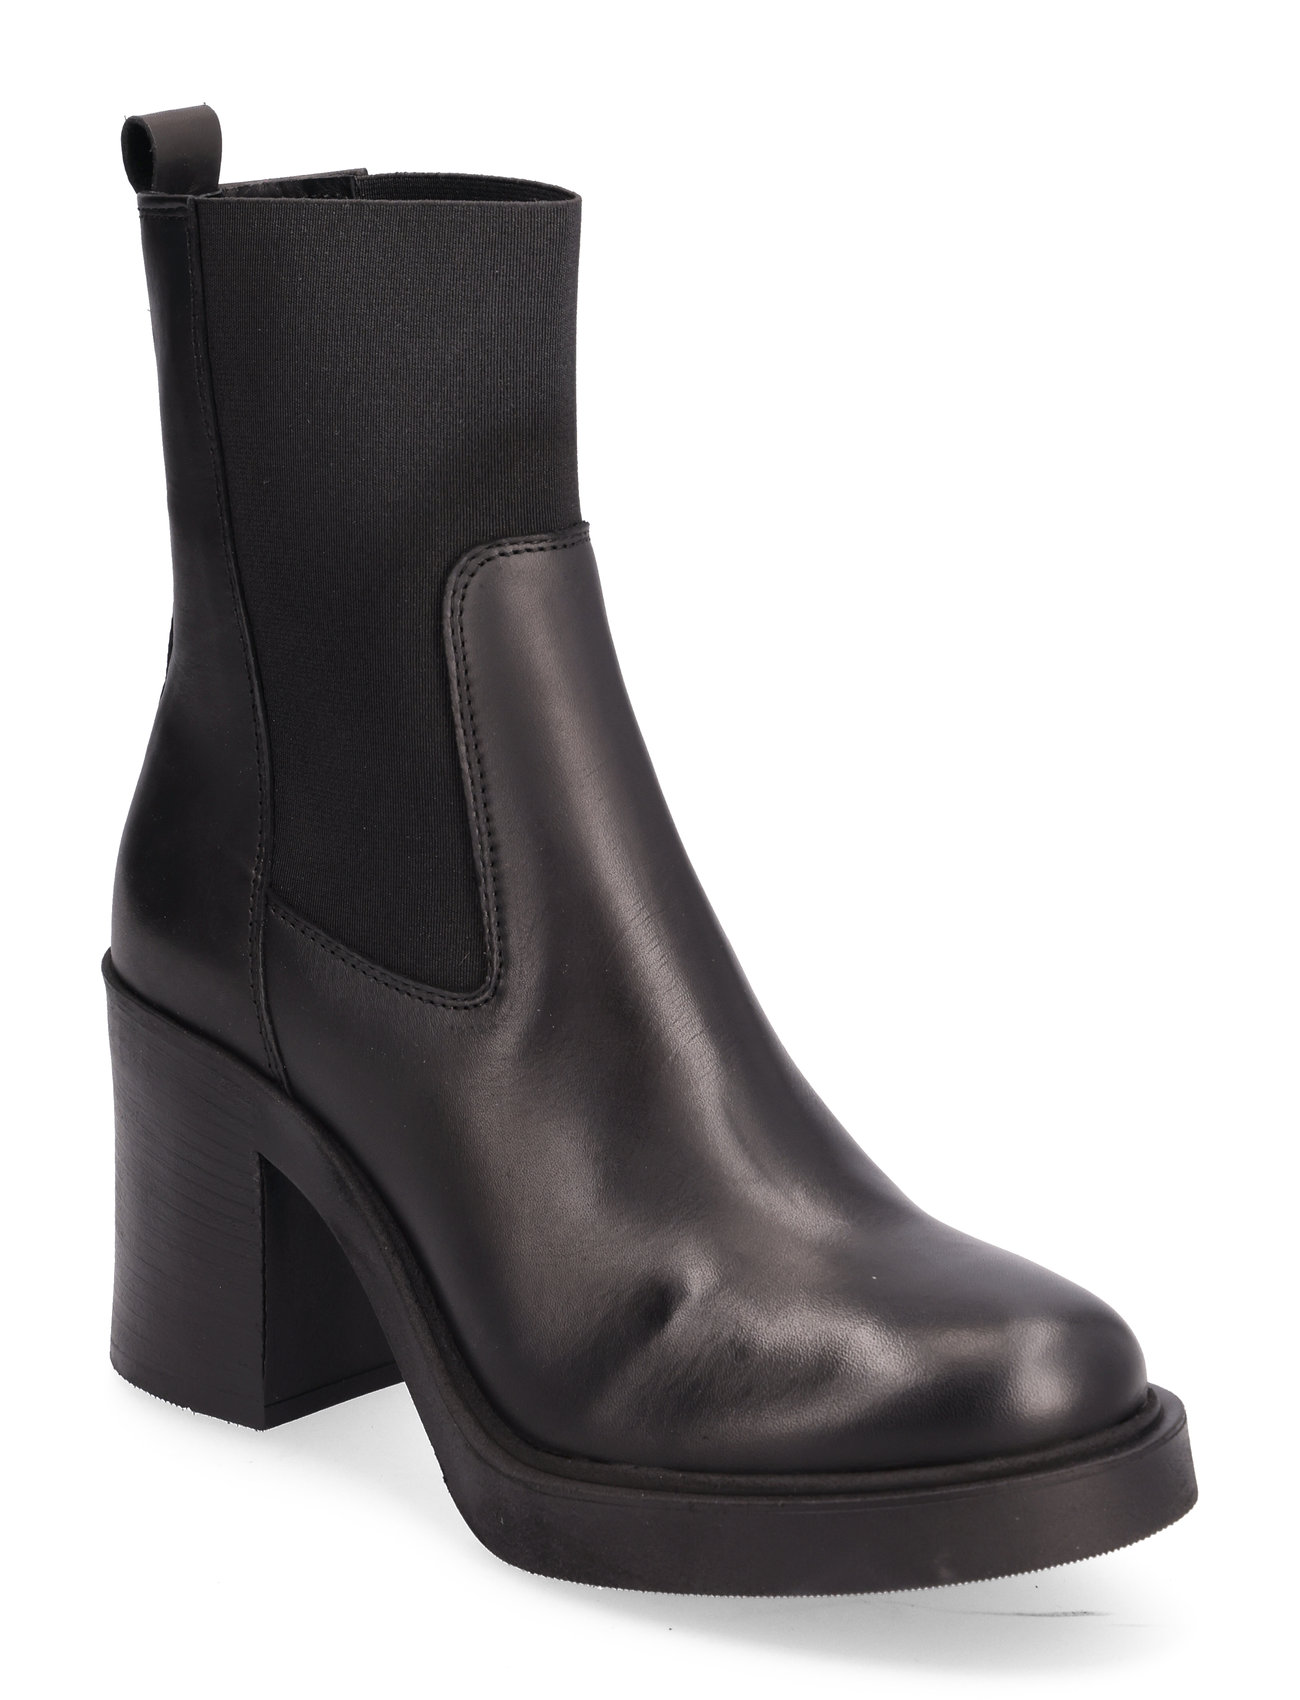 Adele Shoes Boots Ankle Boots Ankle Boots With Heel Black Pavement